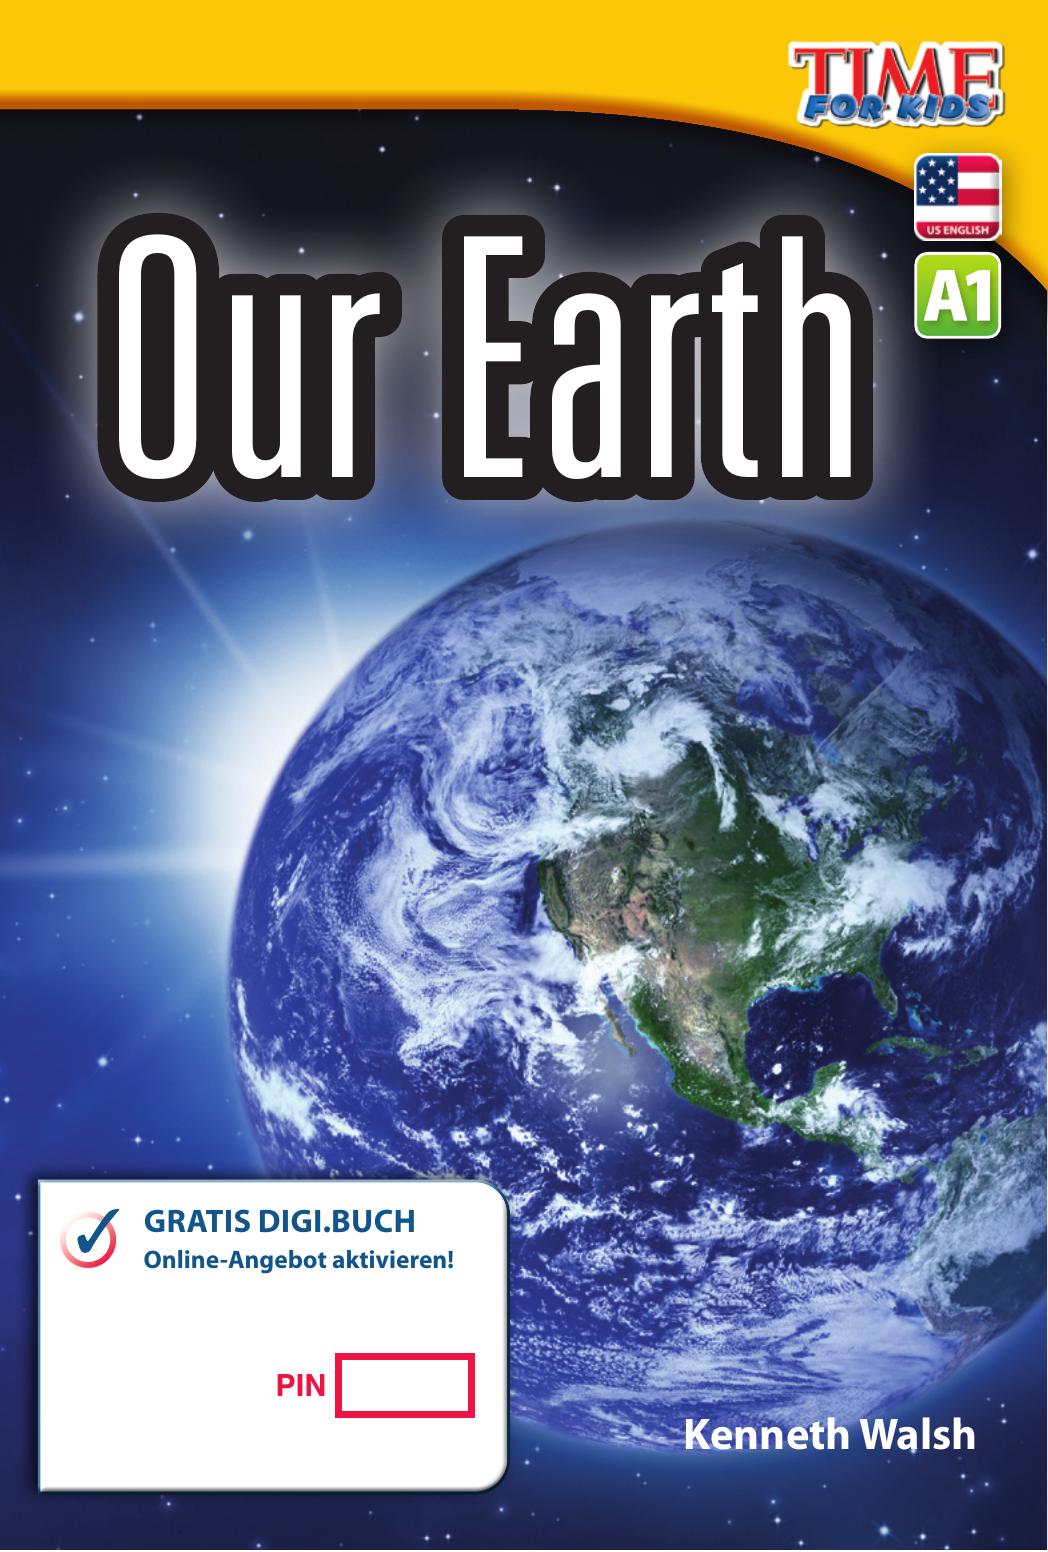 A1 – Our Earth